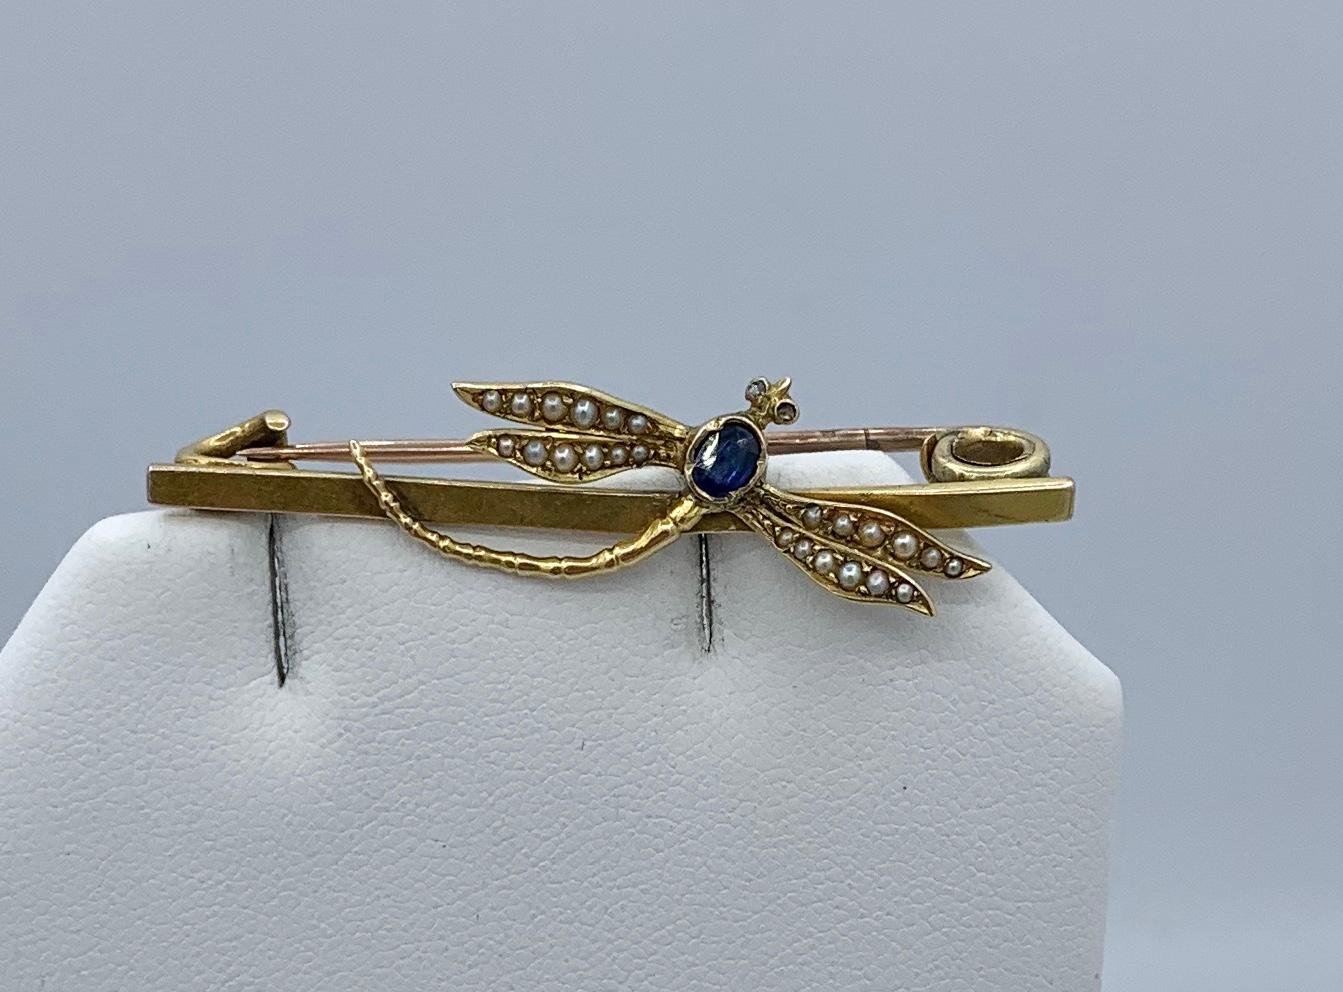 This is a stunning Art Nouveau - Art Deco Dragonfly Insect Brooch Pin with an oval faceted natural mined blue Sapphire of great beauty.  The eyes are set with Rose Cut Diamonds.  The wings are adorned with seed pearls.  The brooch is 14 Karat Gold. 